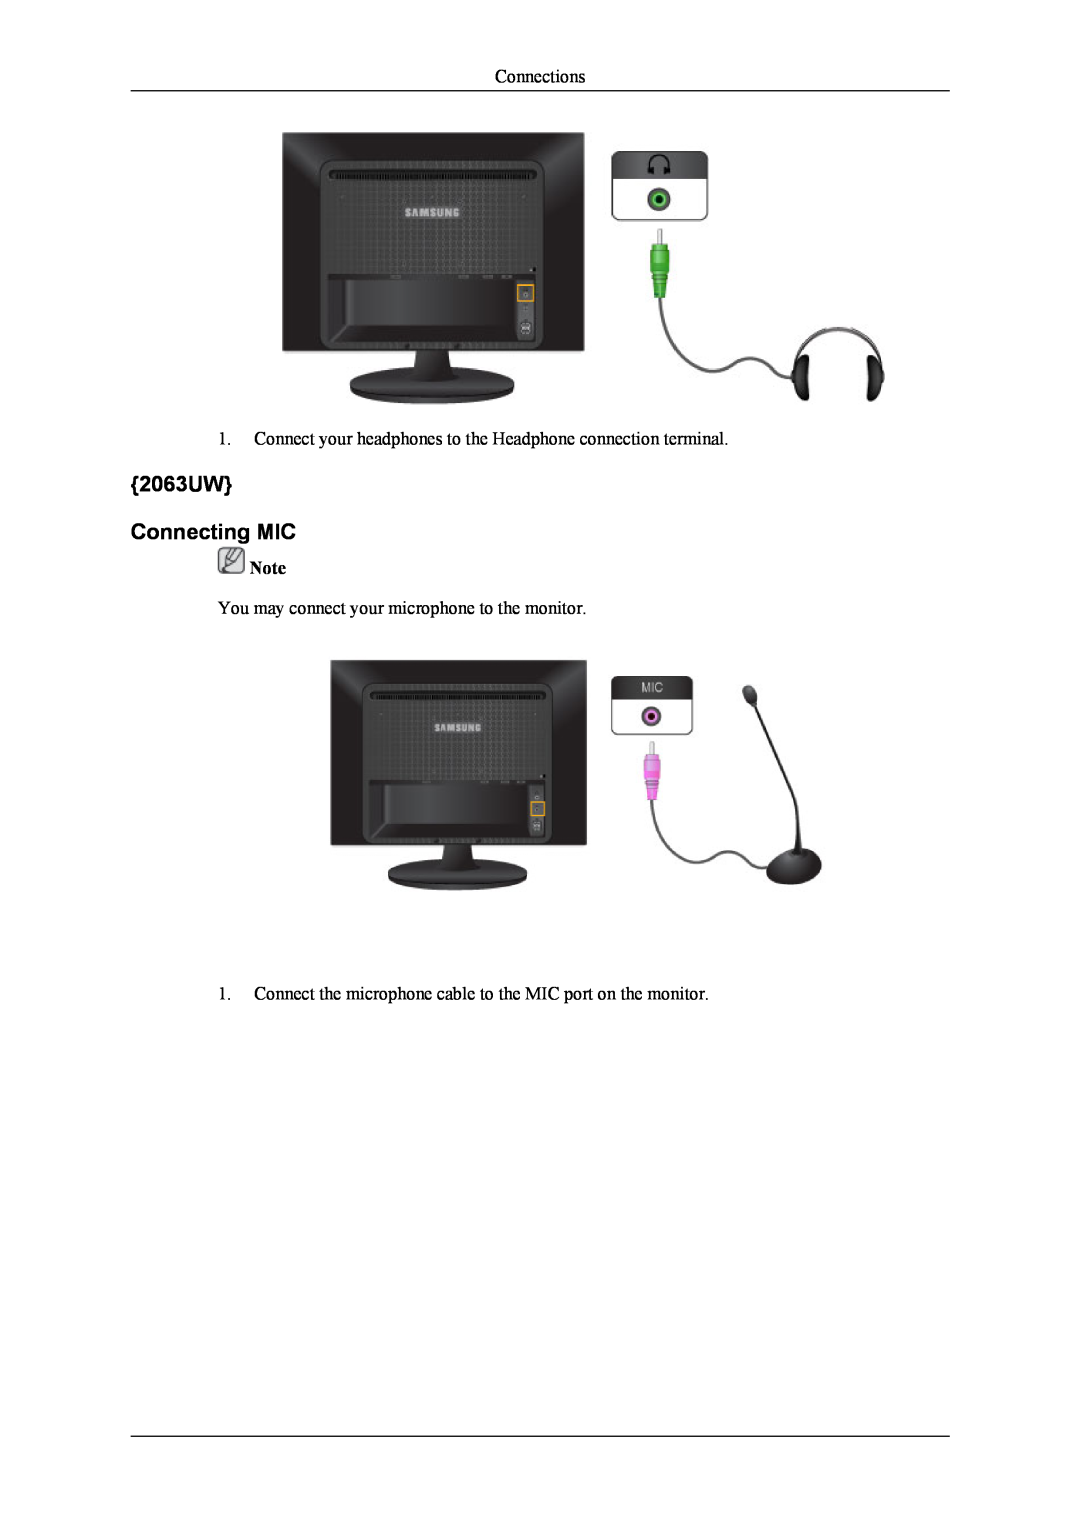 Samsung 963UW user manual 2063UW Connecting MIC, Connections, Connect your headphones to the Headphone connection terminal 